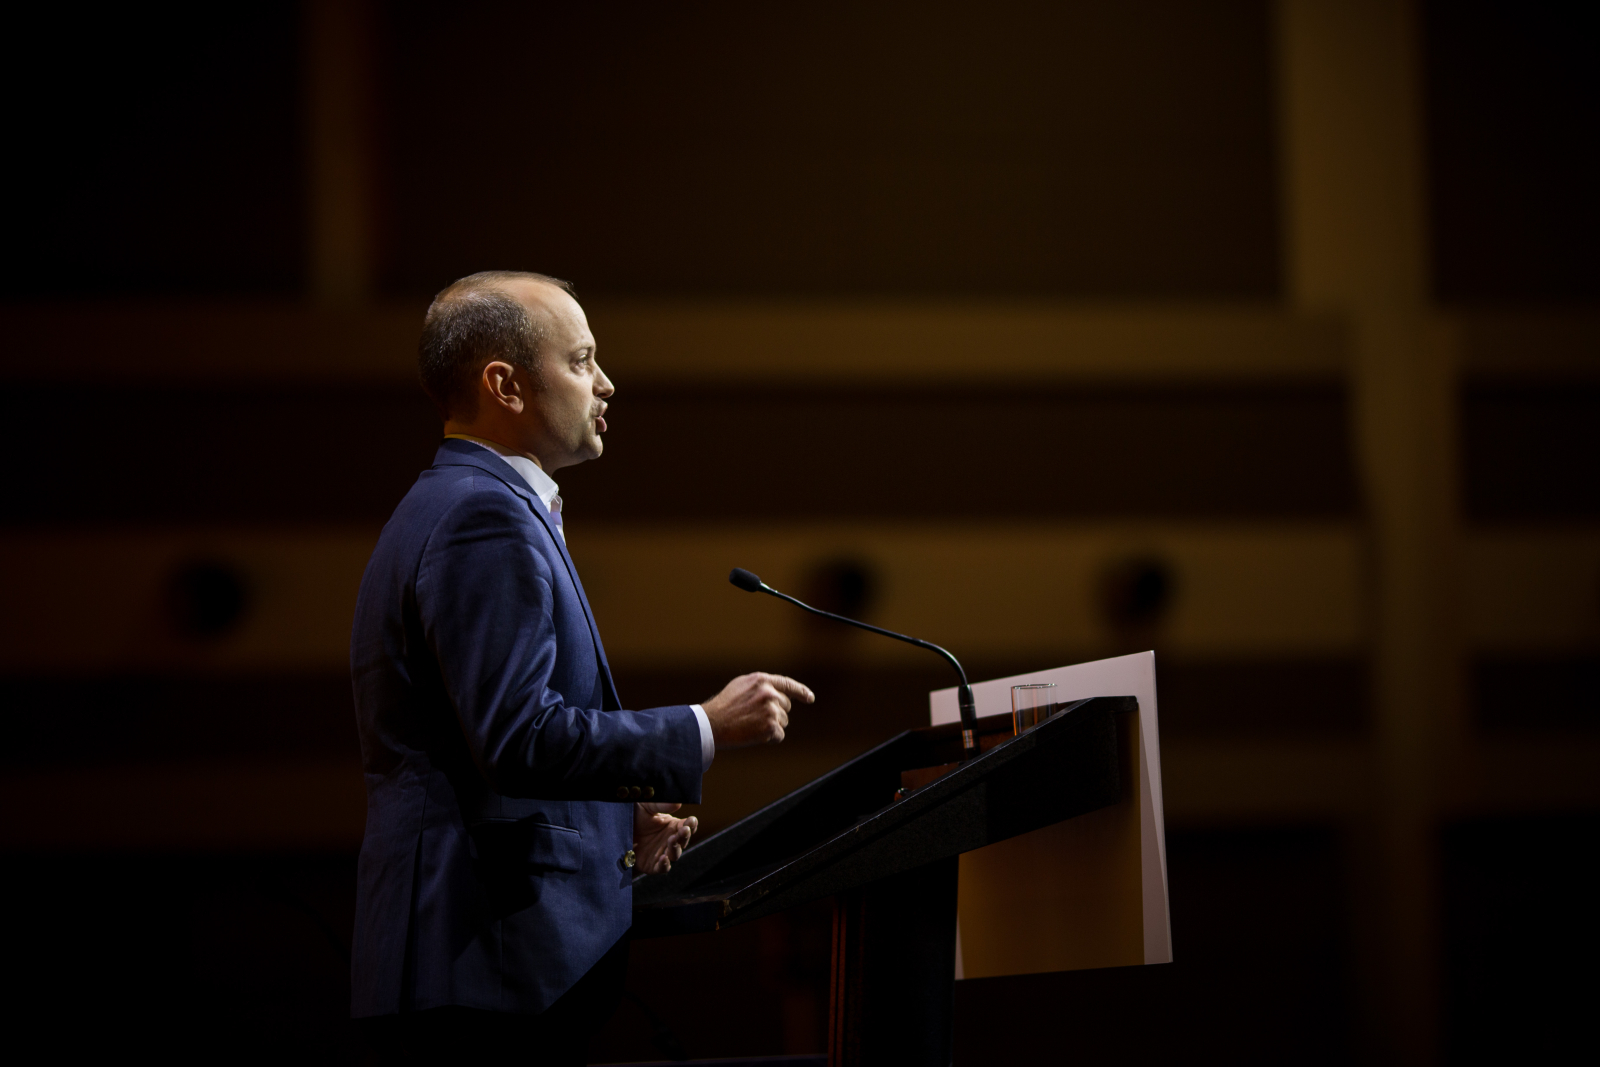 Toronto city councillor Mike Layton addresses delegates at the NDP's national convention in Ottawa on Feb. 16, 2018. Photo by Alex Tétreault